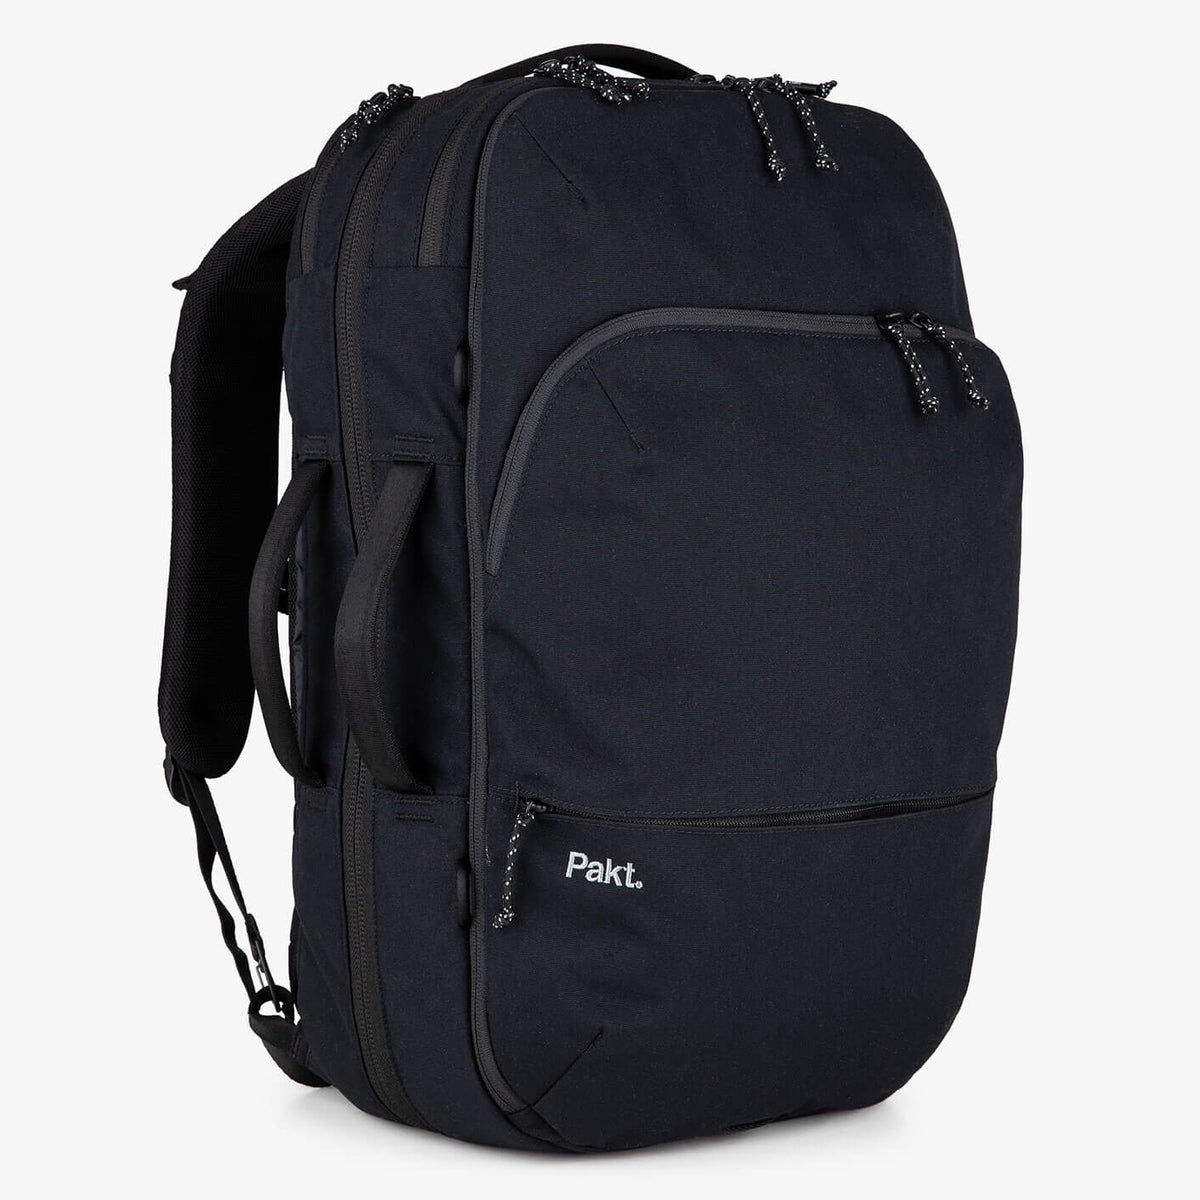 minimalist travel backpack carry on